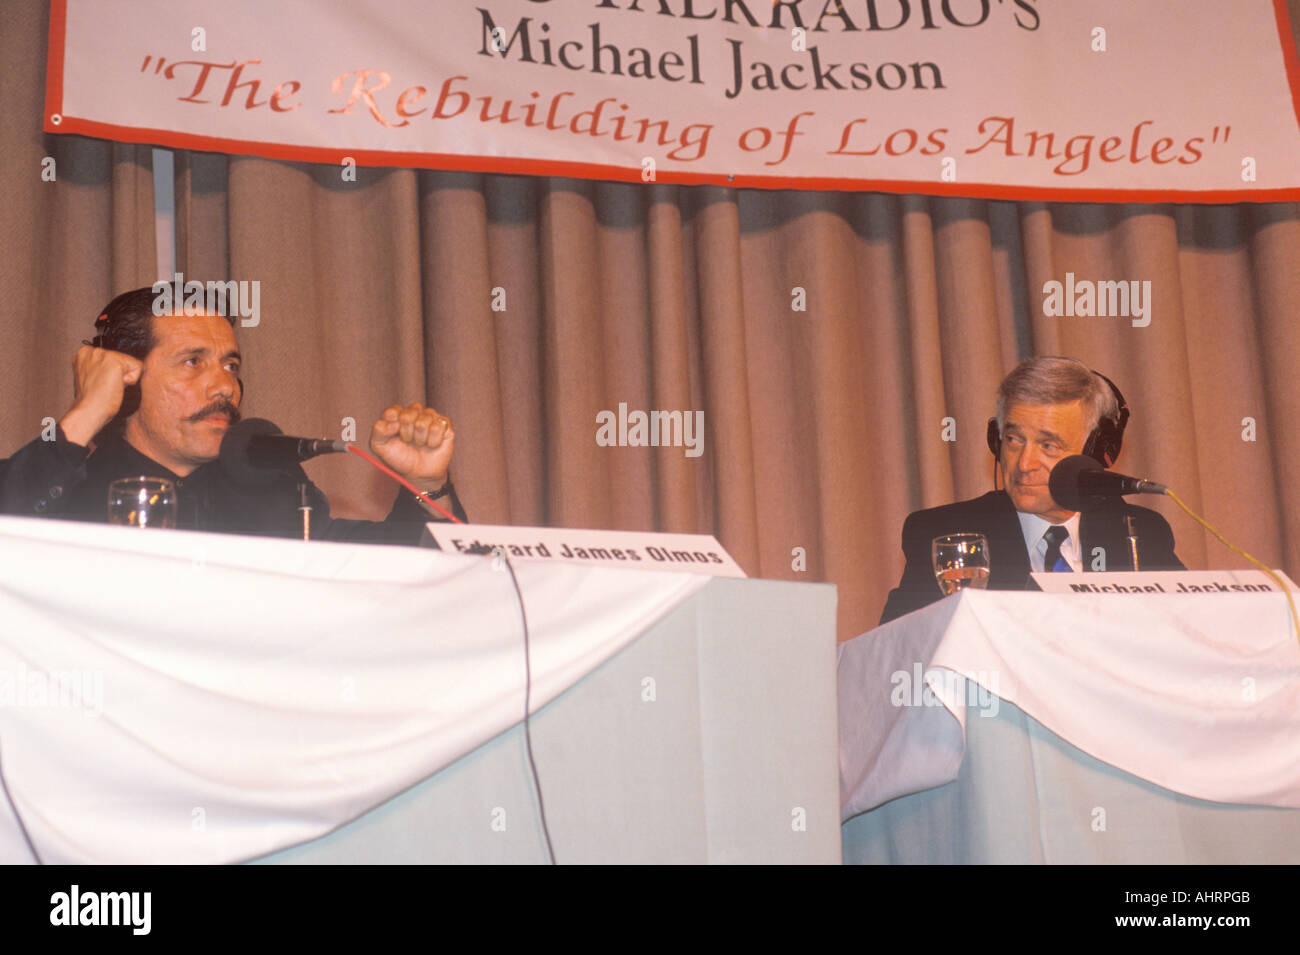 Edward James Olmos and radio host Michael Jackson during conference South Central Los Angeles California Stock Photo